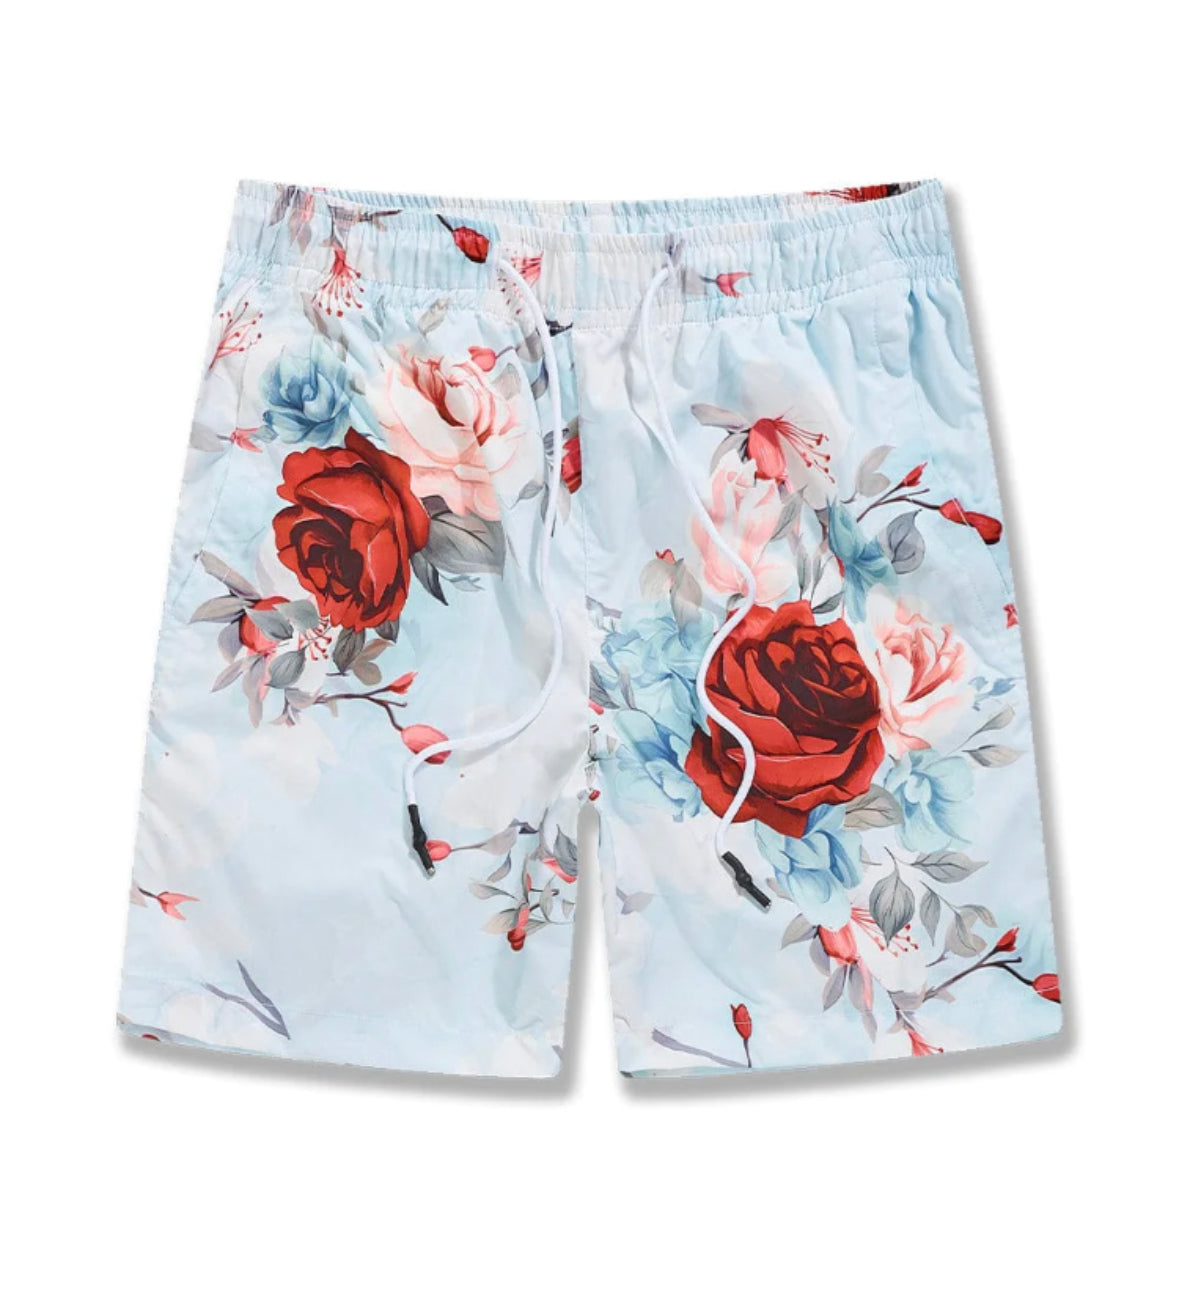 JC RETRO - IBIZA LOUNGE SHORTS Red Floral 2040S